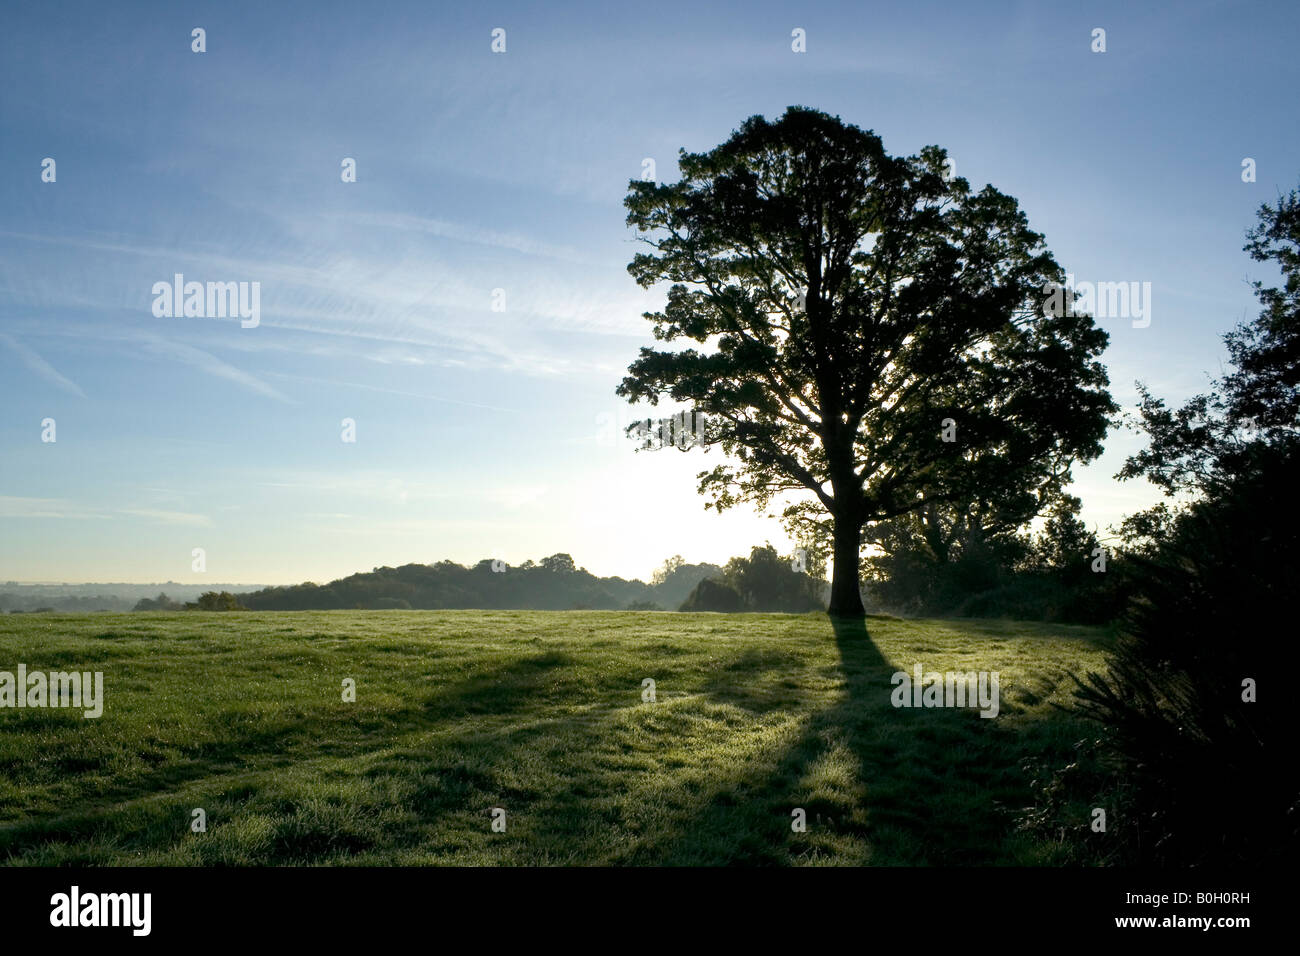 A country scene with the sunobscured behind a tree Stock Photo